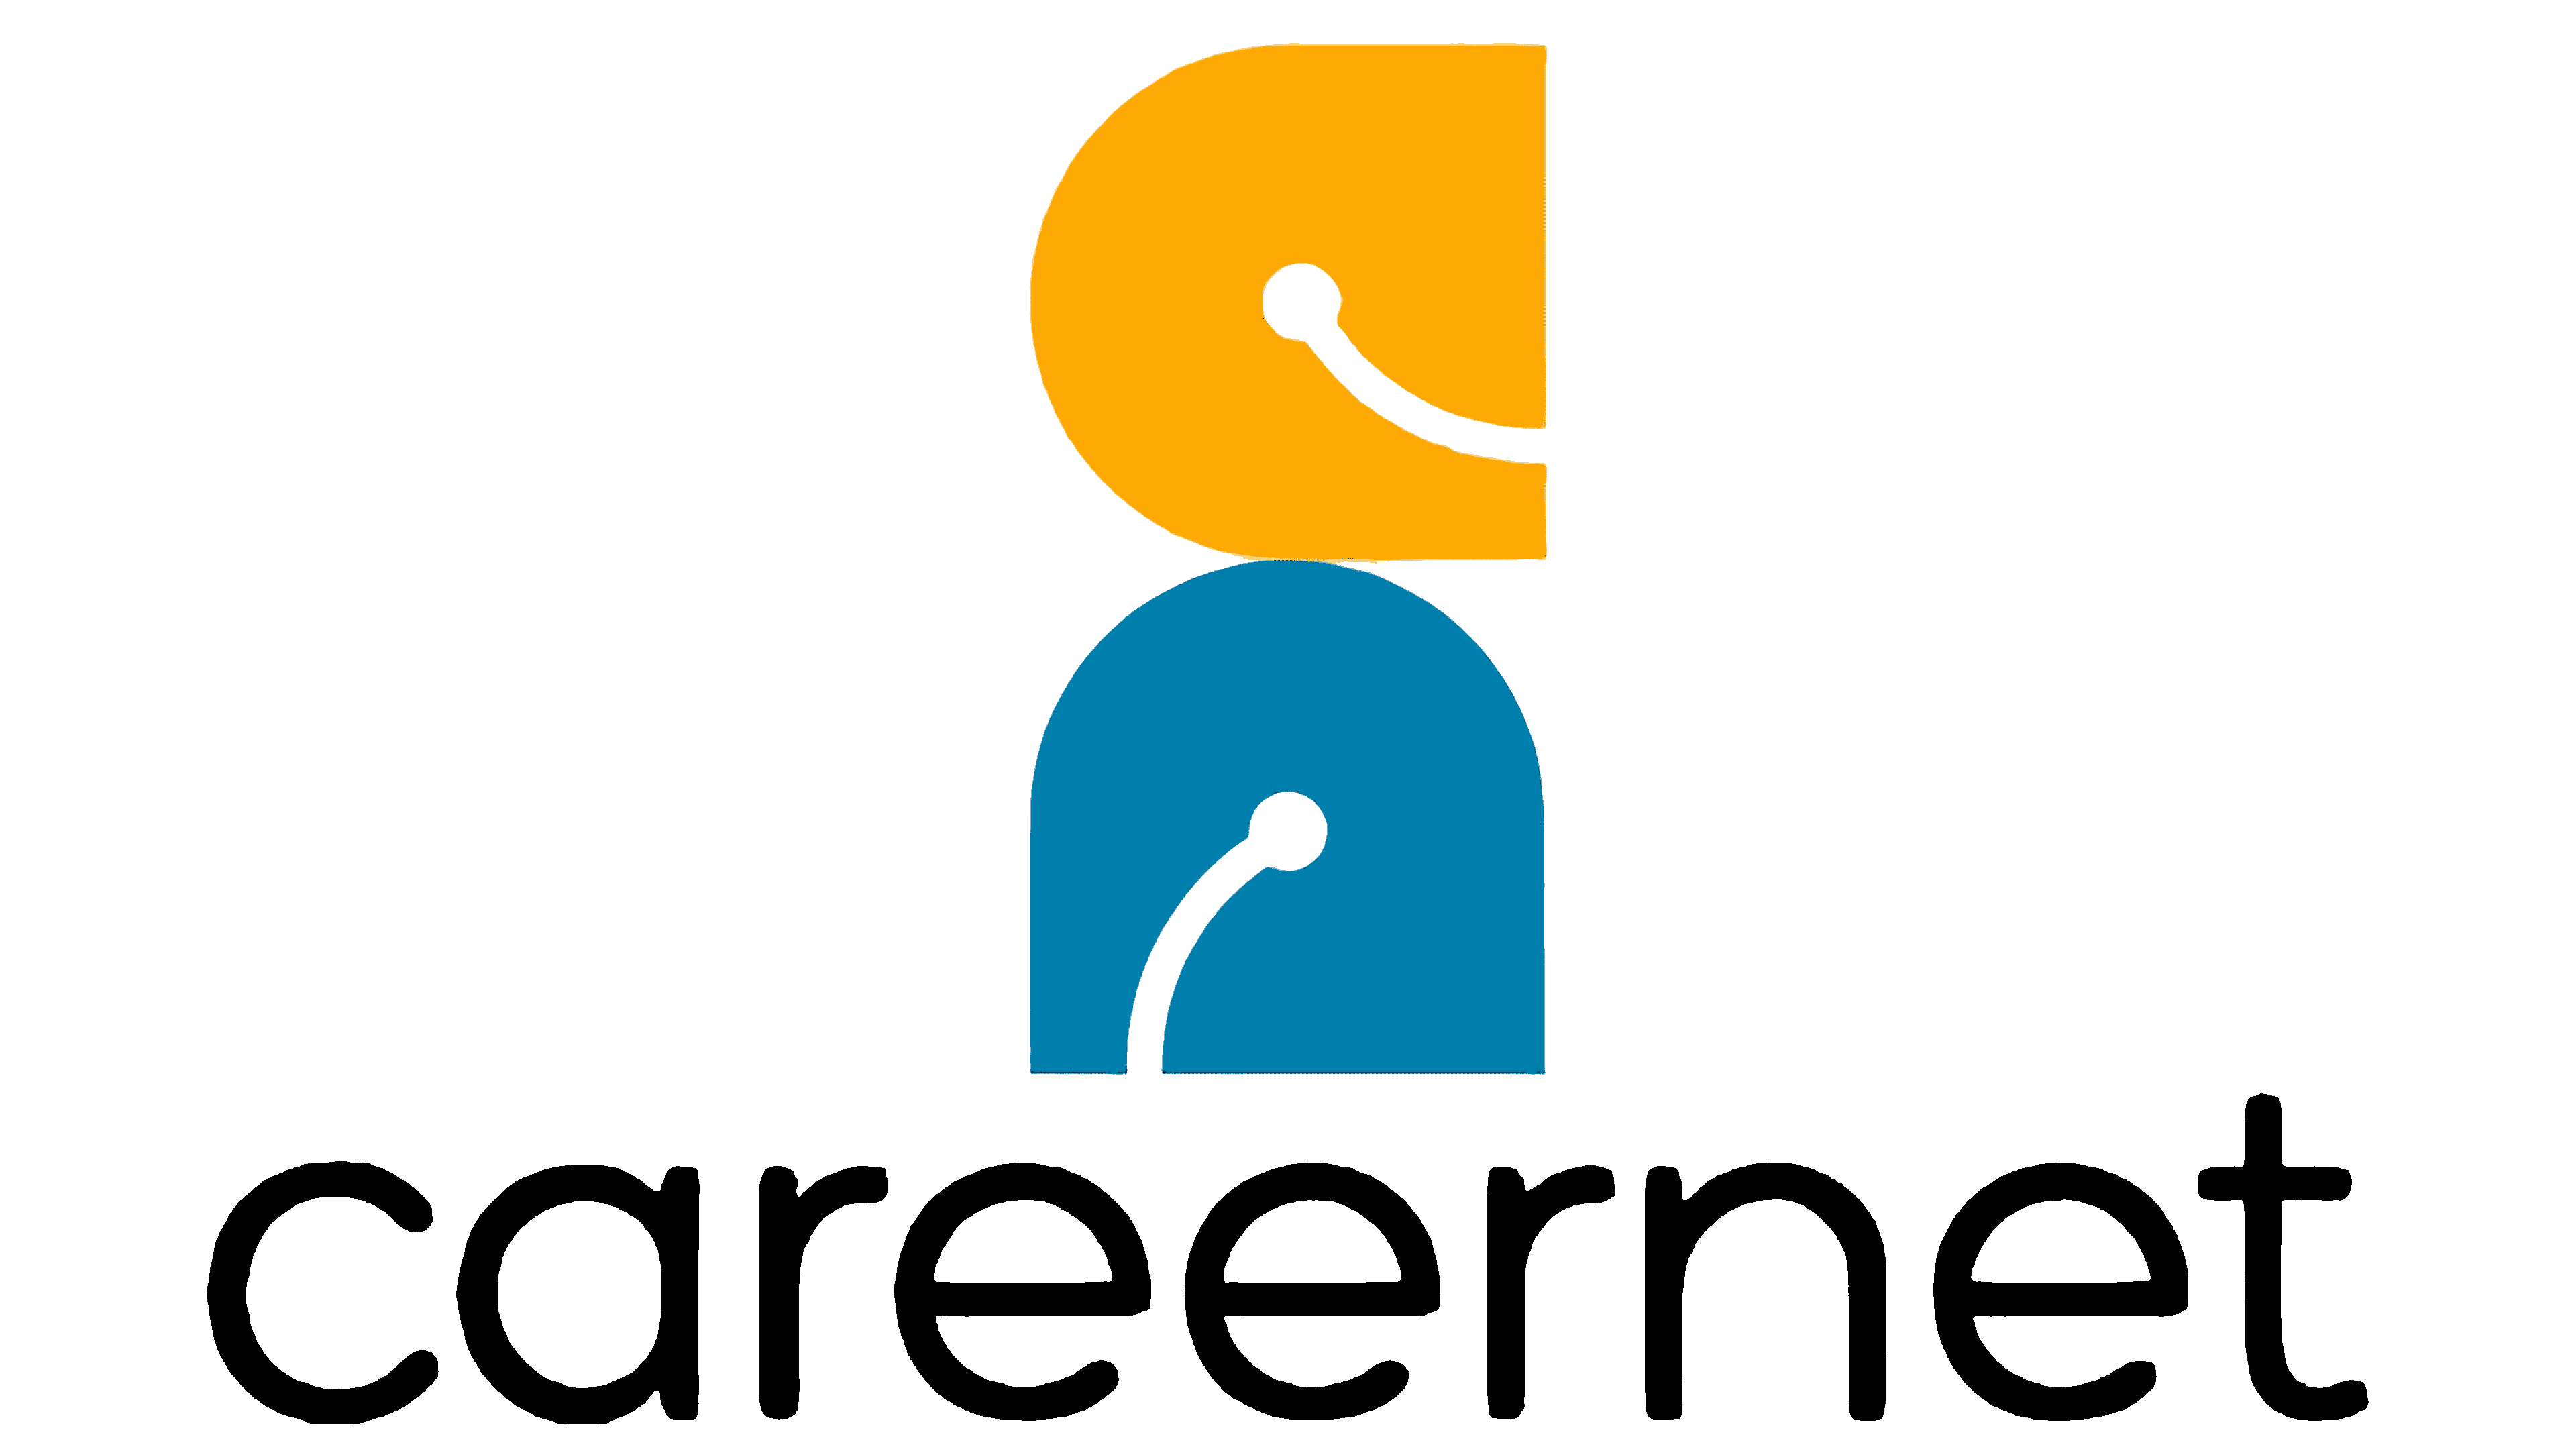 Careernet reveals new trademark for a tech world - Passionate In Marketing